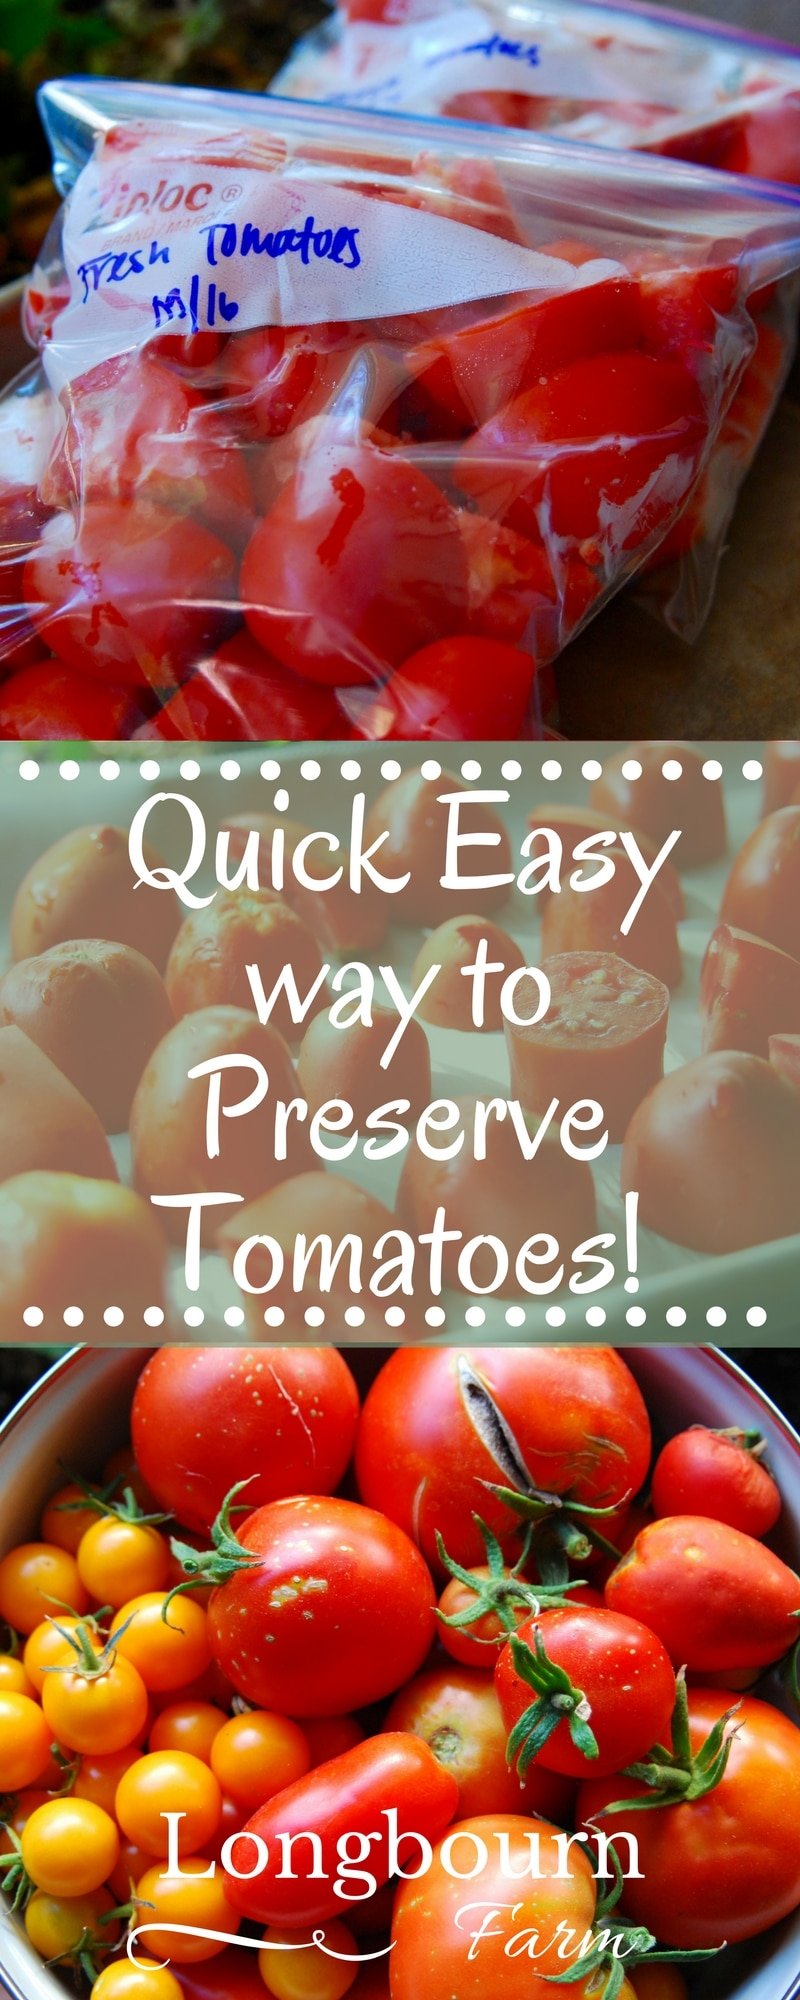 Looking for a quick easy way to preserve tomatoes? Freeze them raw! Simply dice, flash freeze, bag them up and you'll have garden tomatoes all year long.